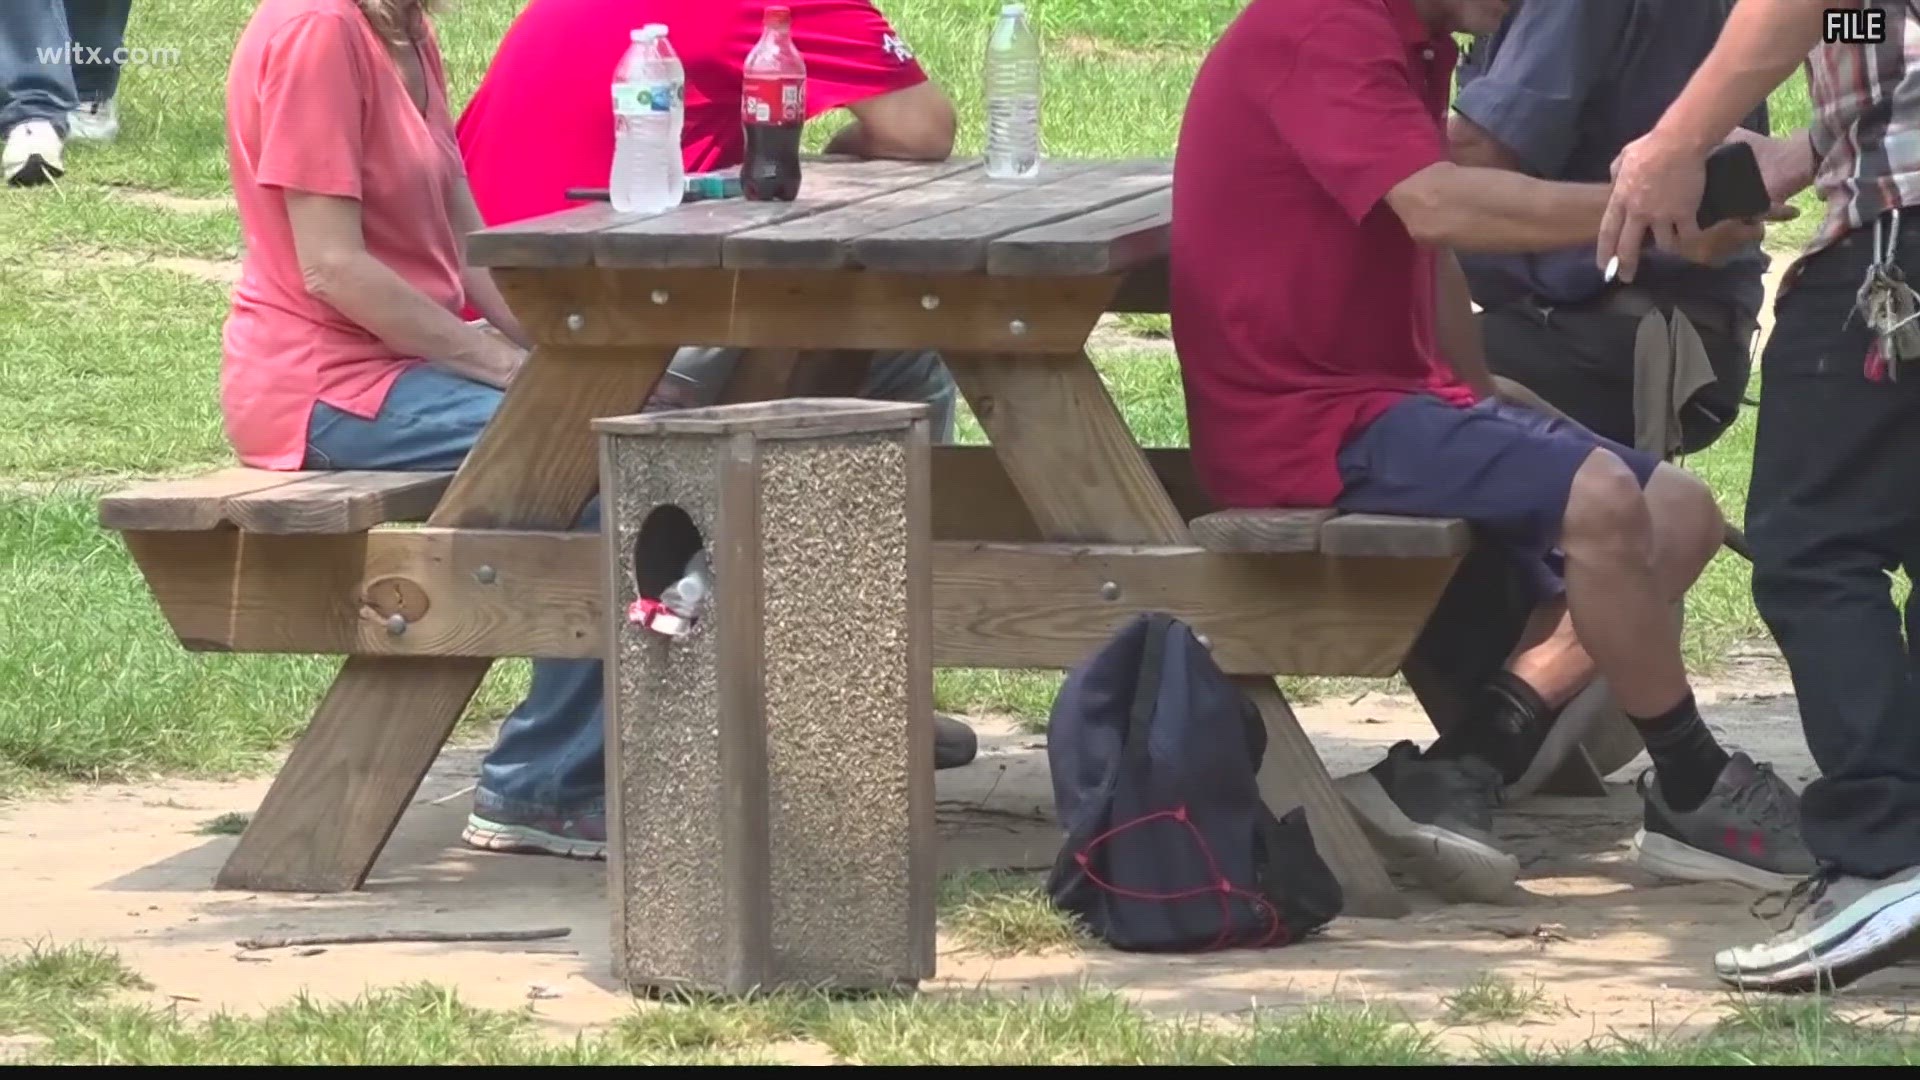 The city next week is set to give final approval to what's being called an "urban camping" ordinance designed to address the city's homeless population.